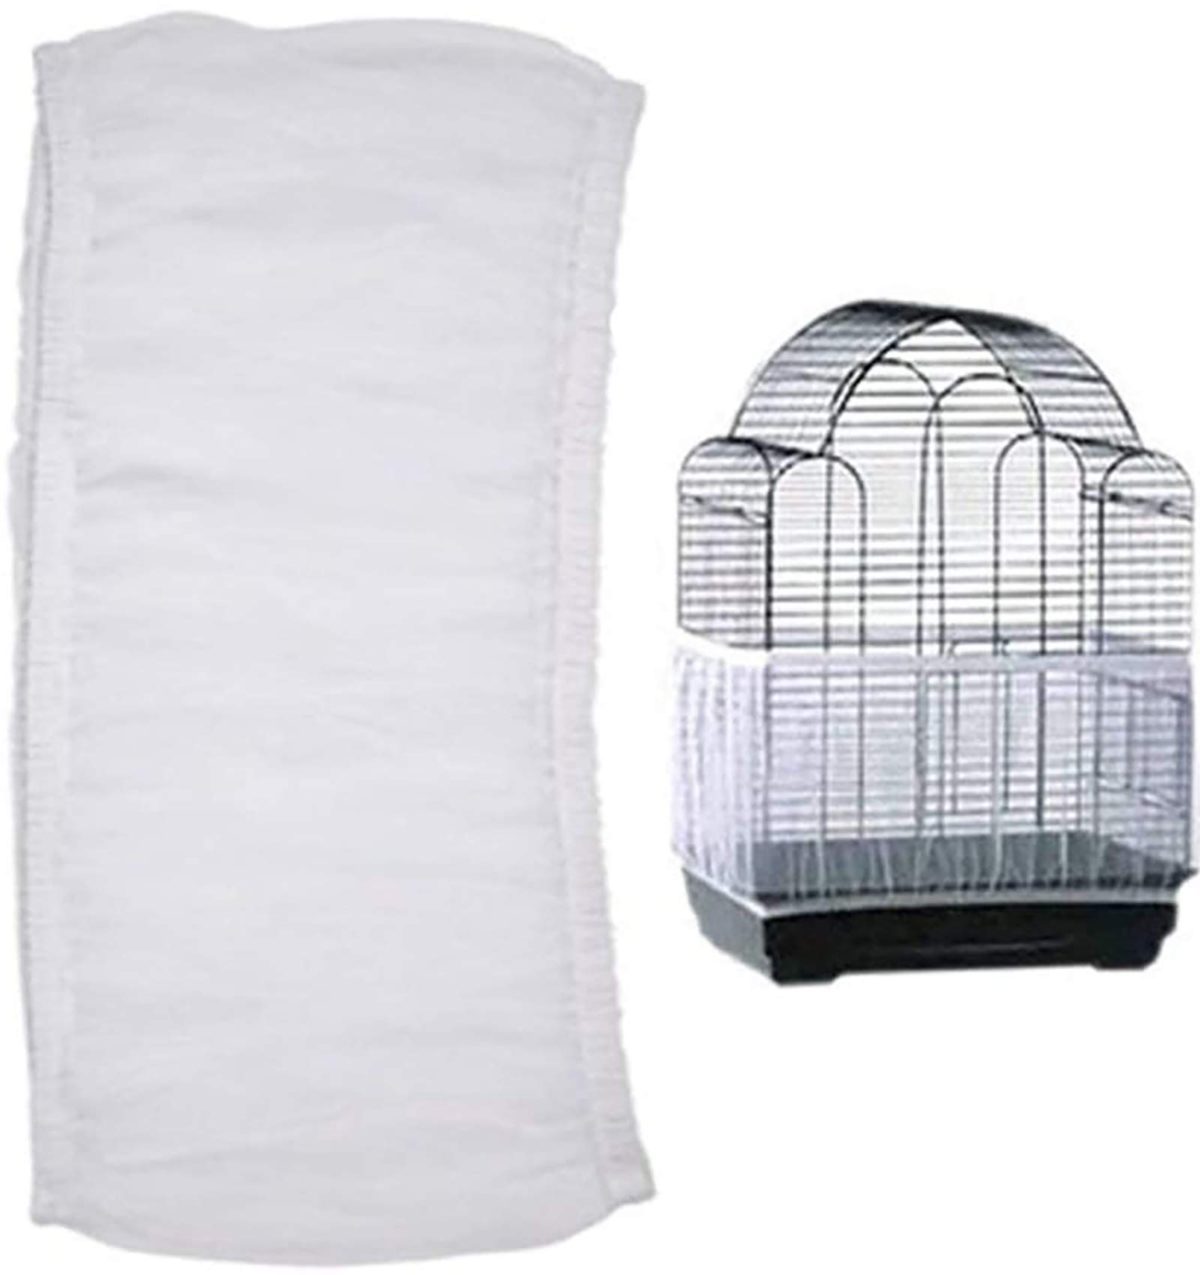 Birds Cage Net Cover with Adjustable Drawstring